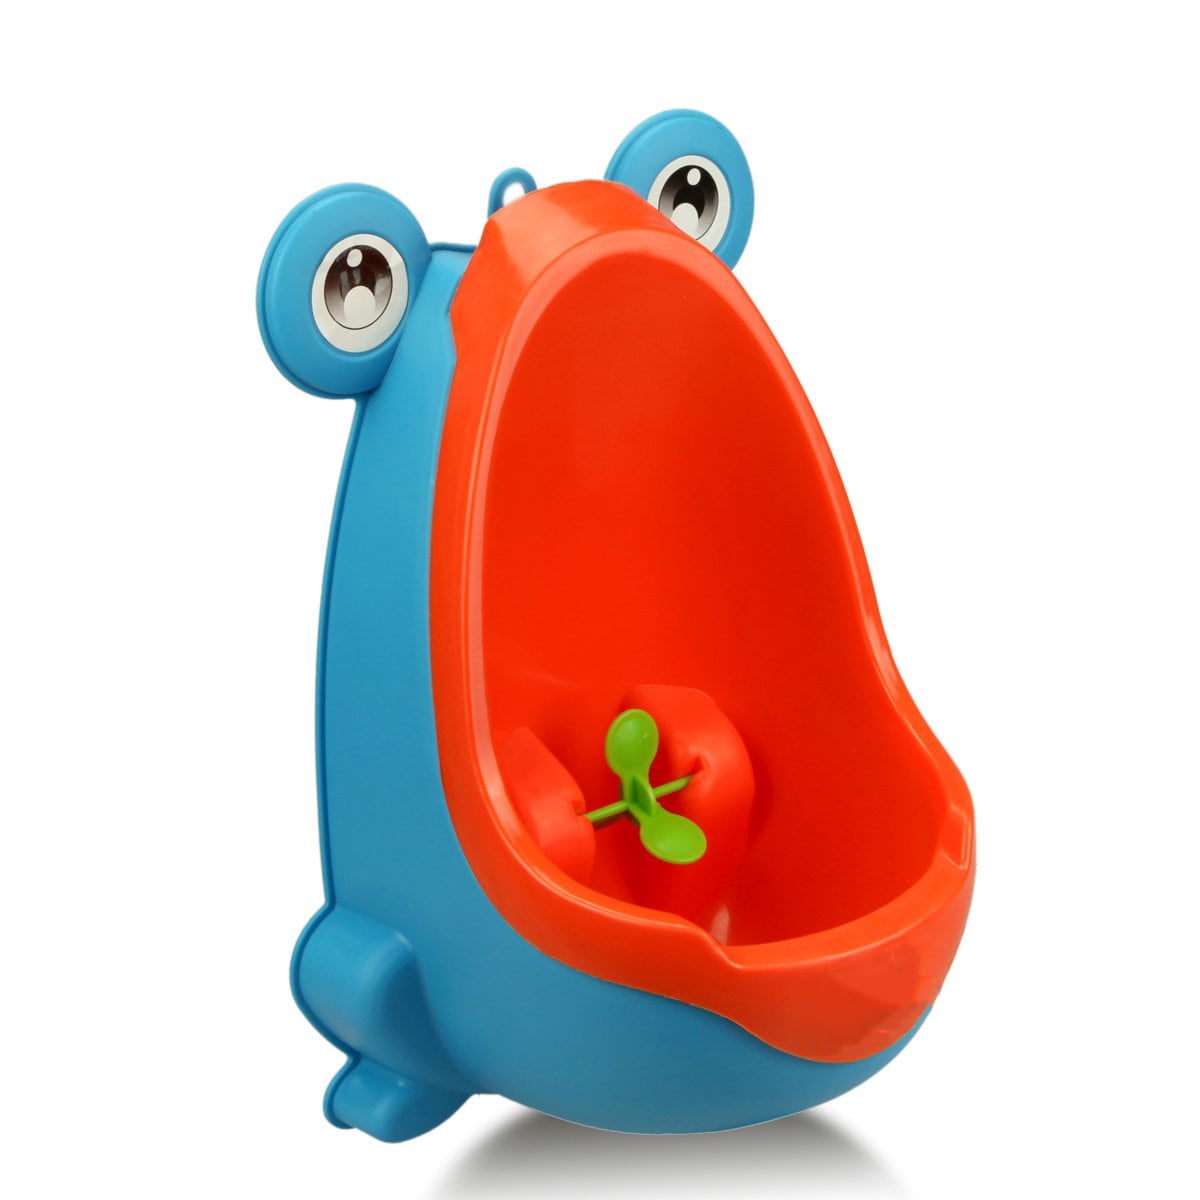 Blackish Green Foryee Cute Frog Potty Training Urinal for Boys with Funny Aiming Target